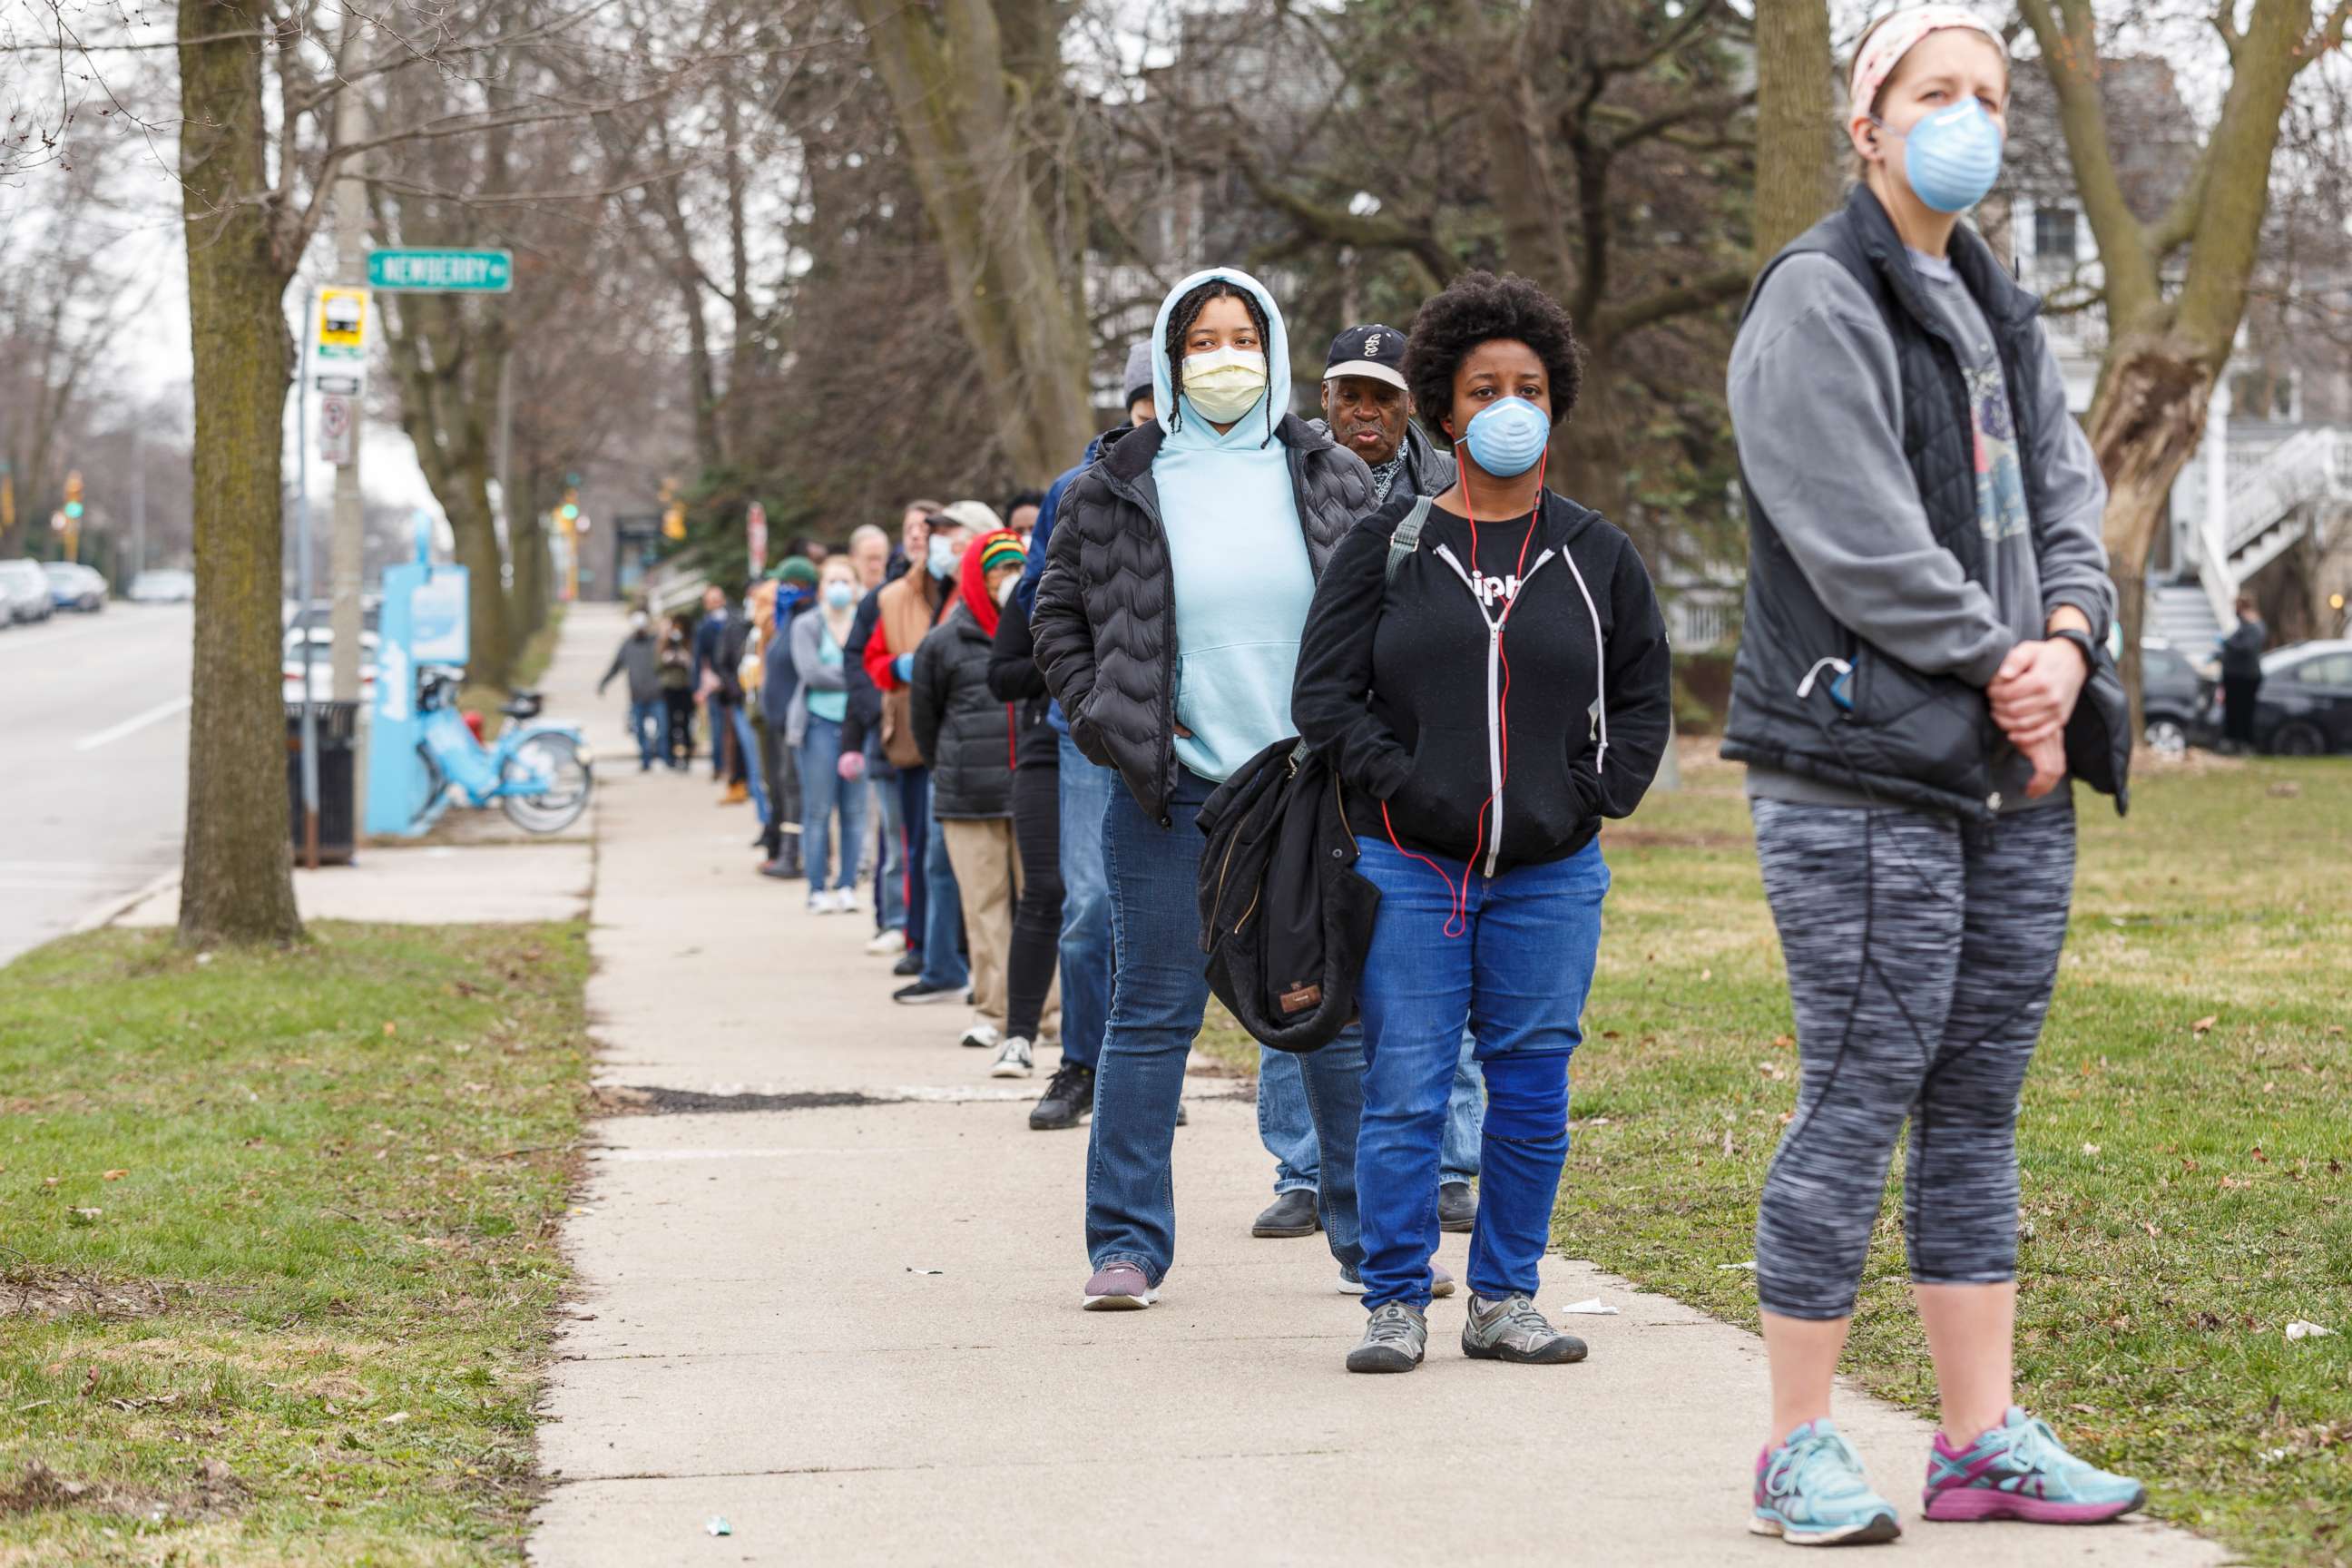 PHOTO: A line to vote in the Wisconsins spring primary election wraps around for blocks and blocks at Riverdale High School on April 7, 2020, in Milwaukee.